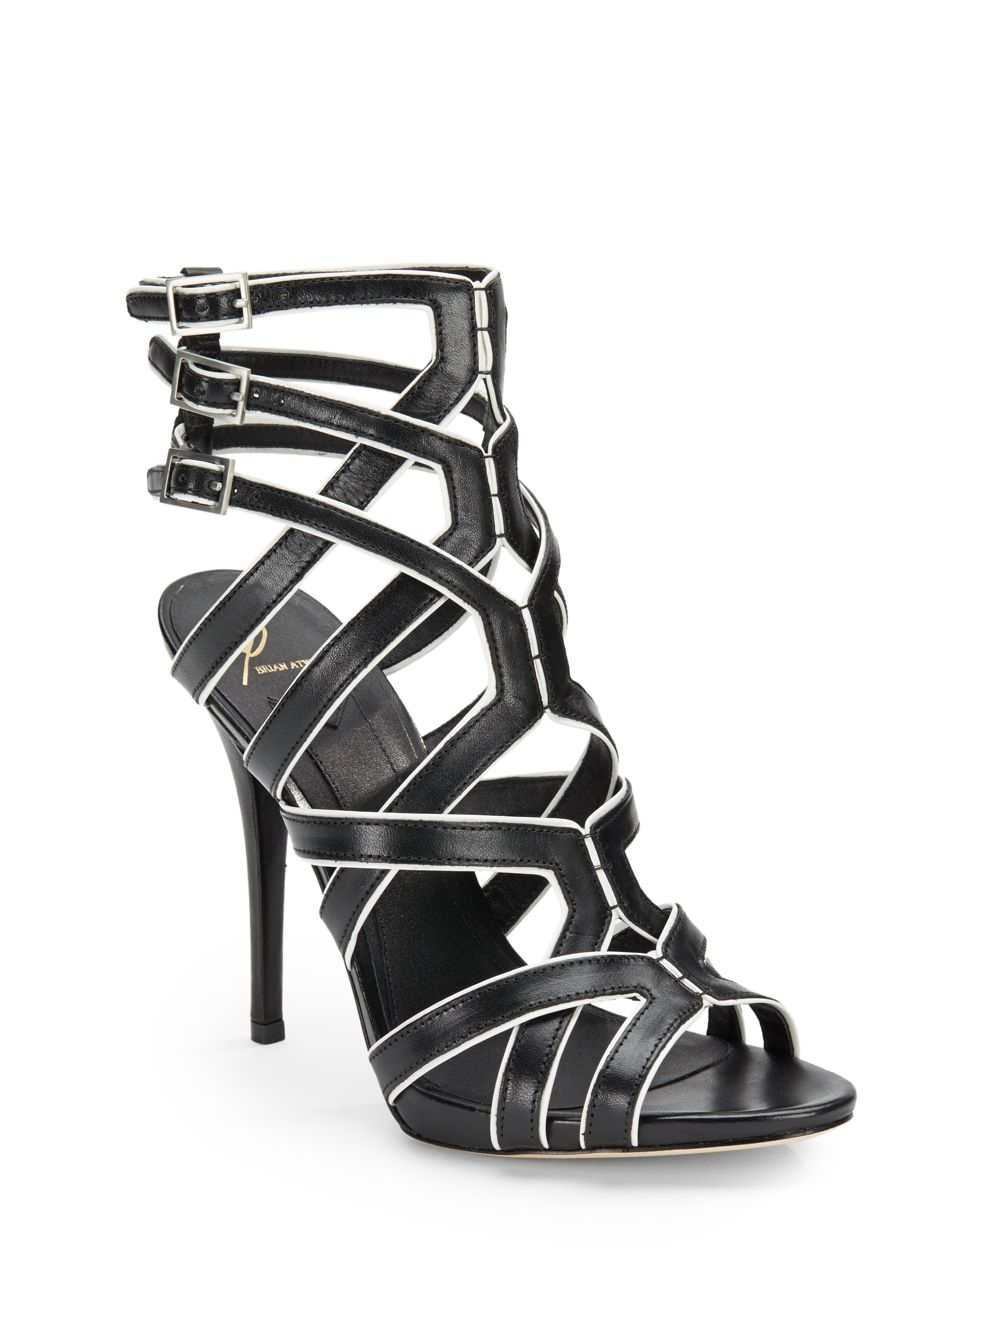 B brian atwood Carbinia Leather Strappy Sandals in Black | Lyst